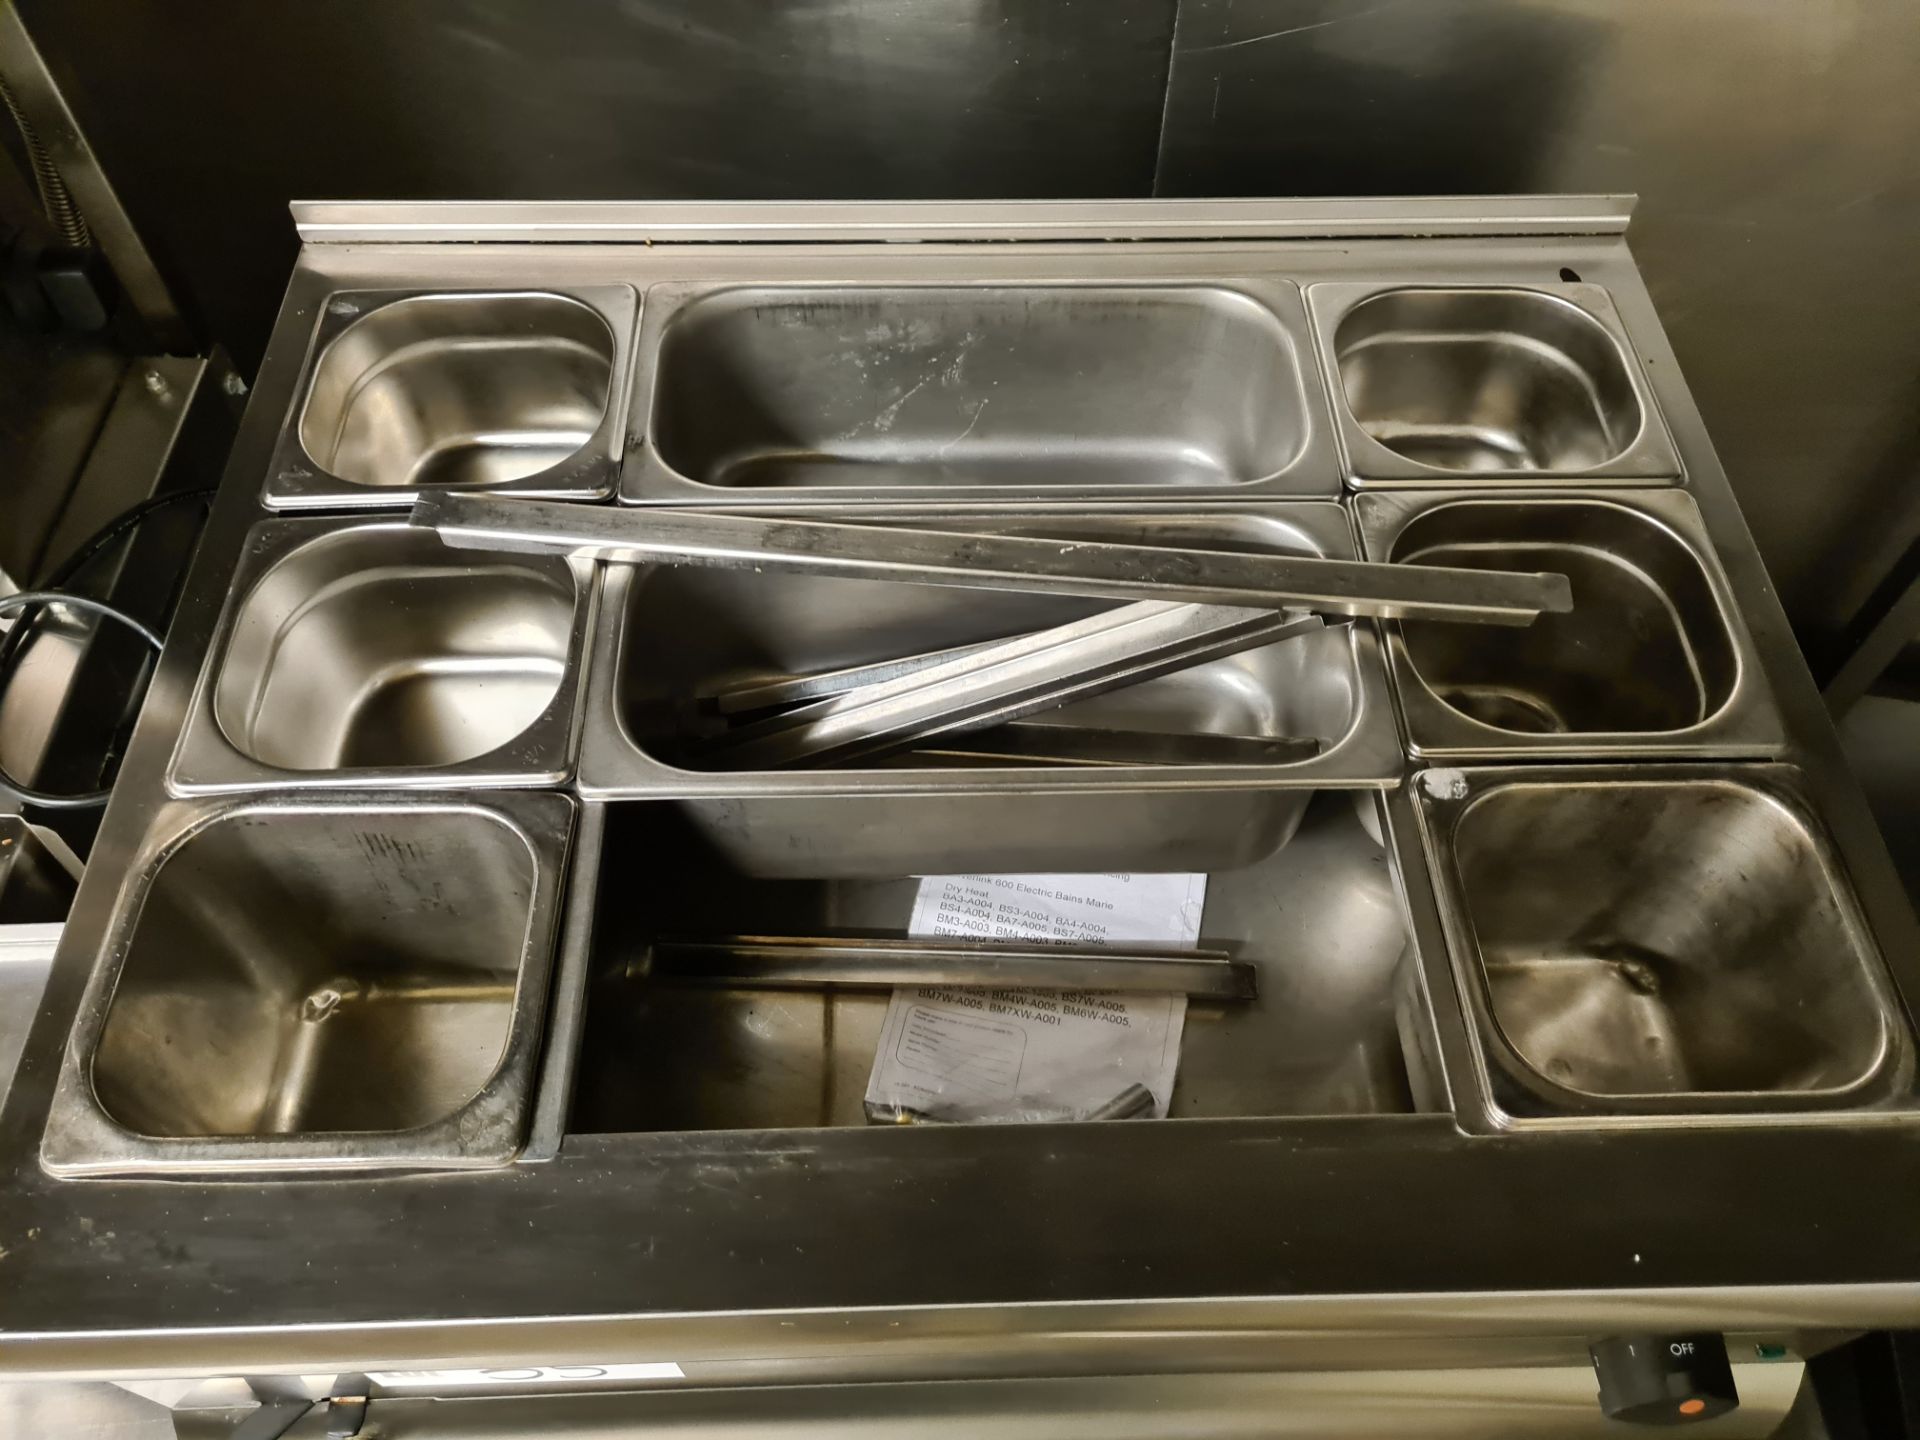 LINCAT A005 Table Top Stainless Steel Bain Marie, S/N 30376924 (240v) - Image 2 of 4